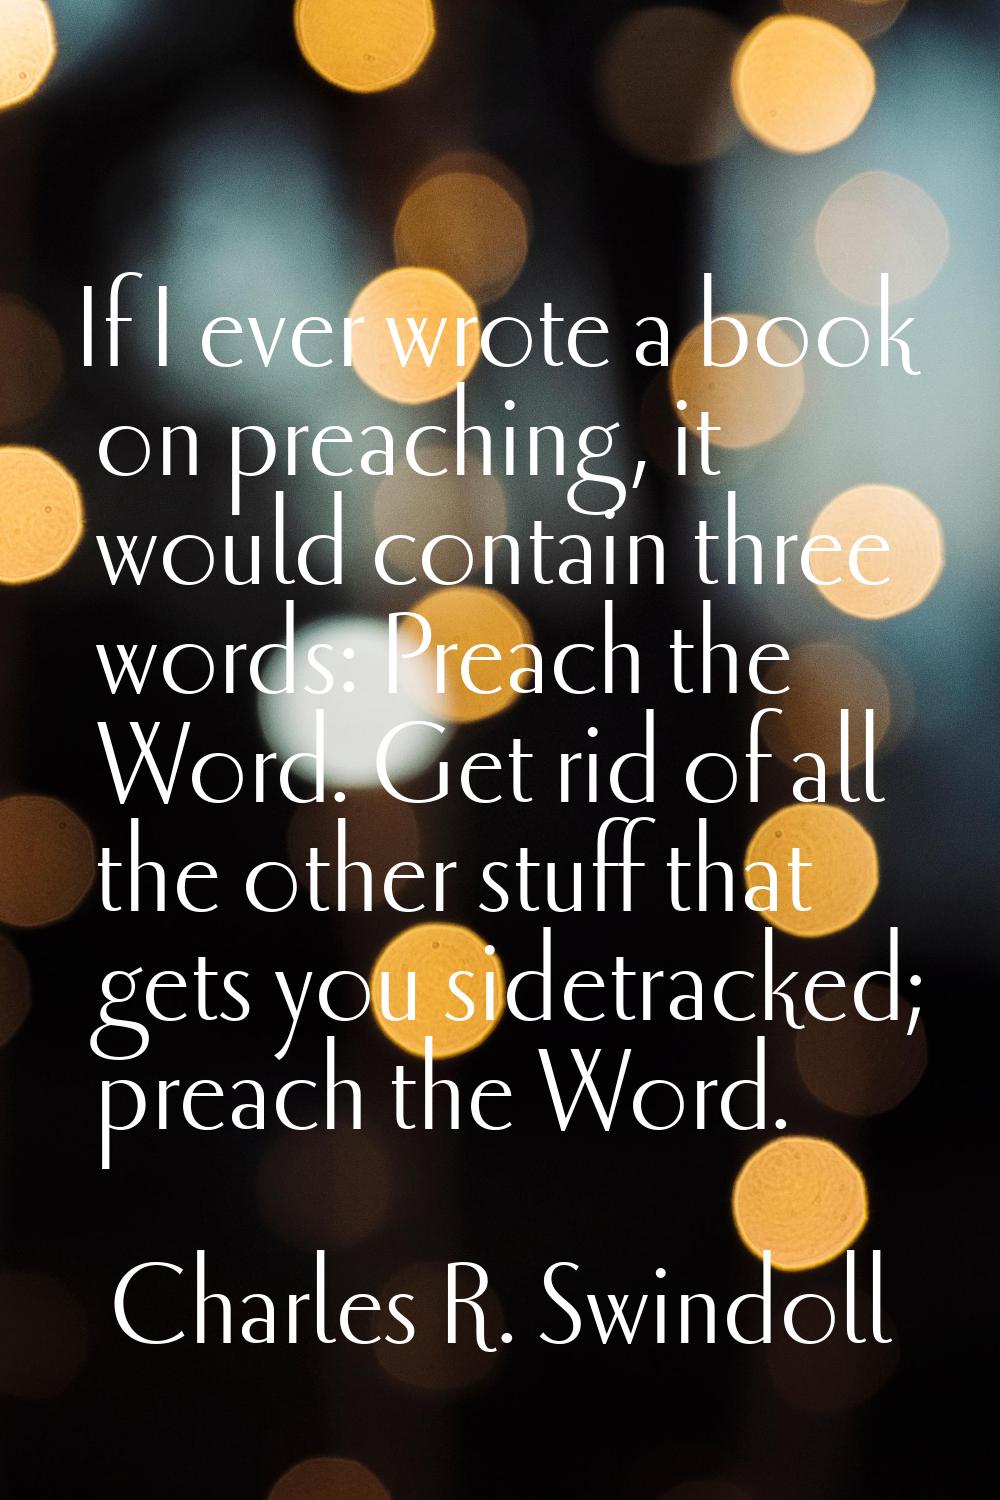 If I ever wrote a book on preaching, it would contain three words: Preach the Word. Get rid of all 